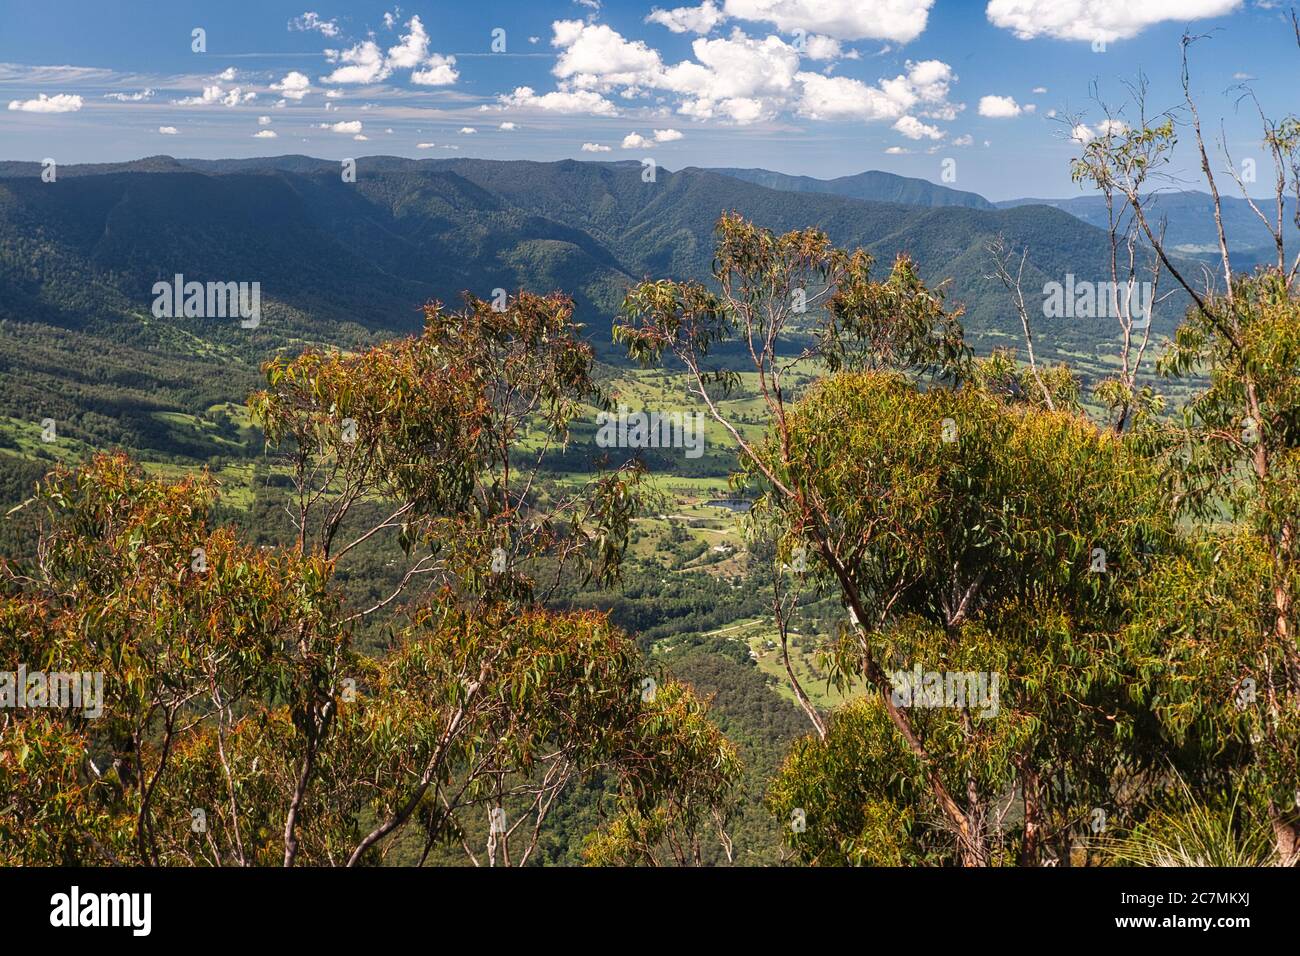 Typical bush country in the Border Ranges in the midd east of New South Wales, Australia Stock Photo